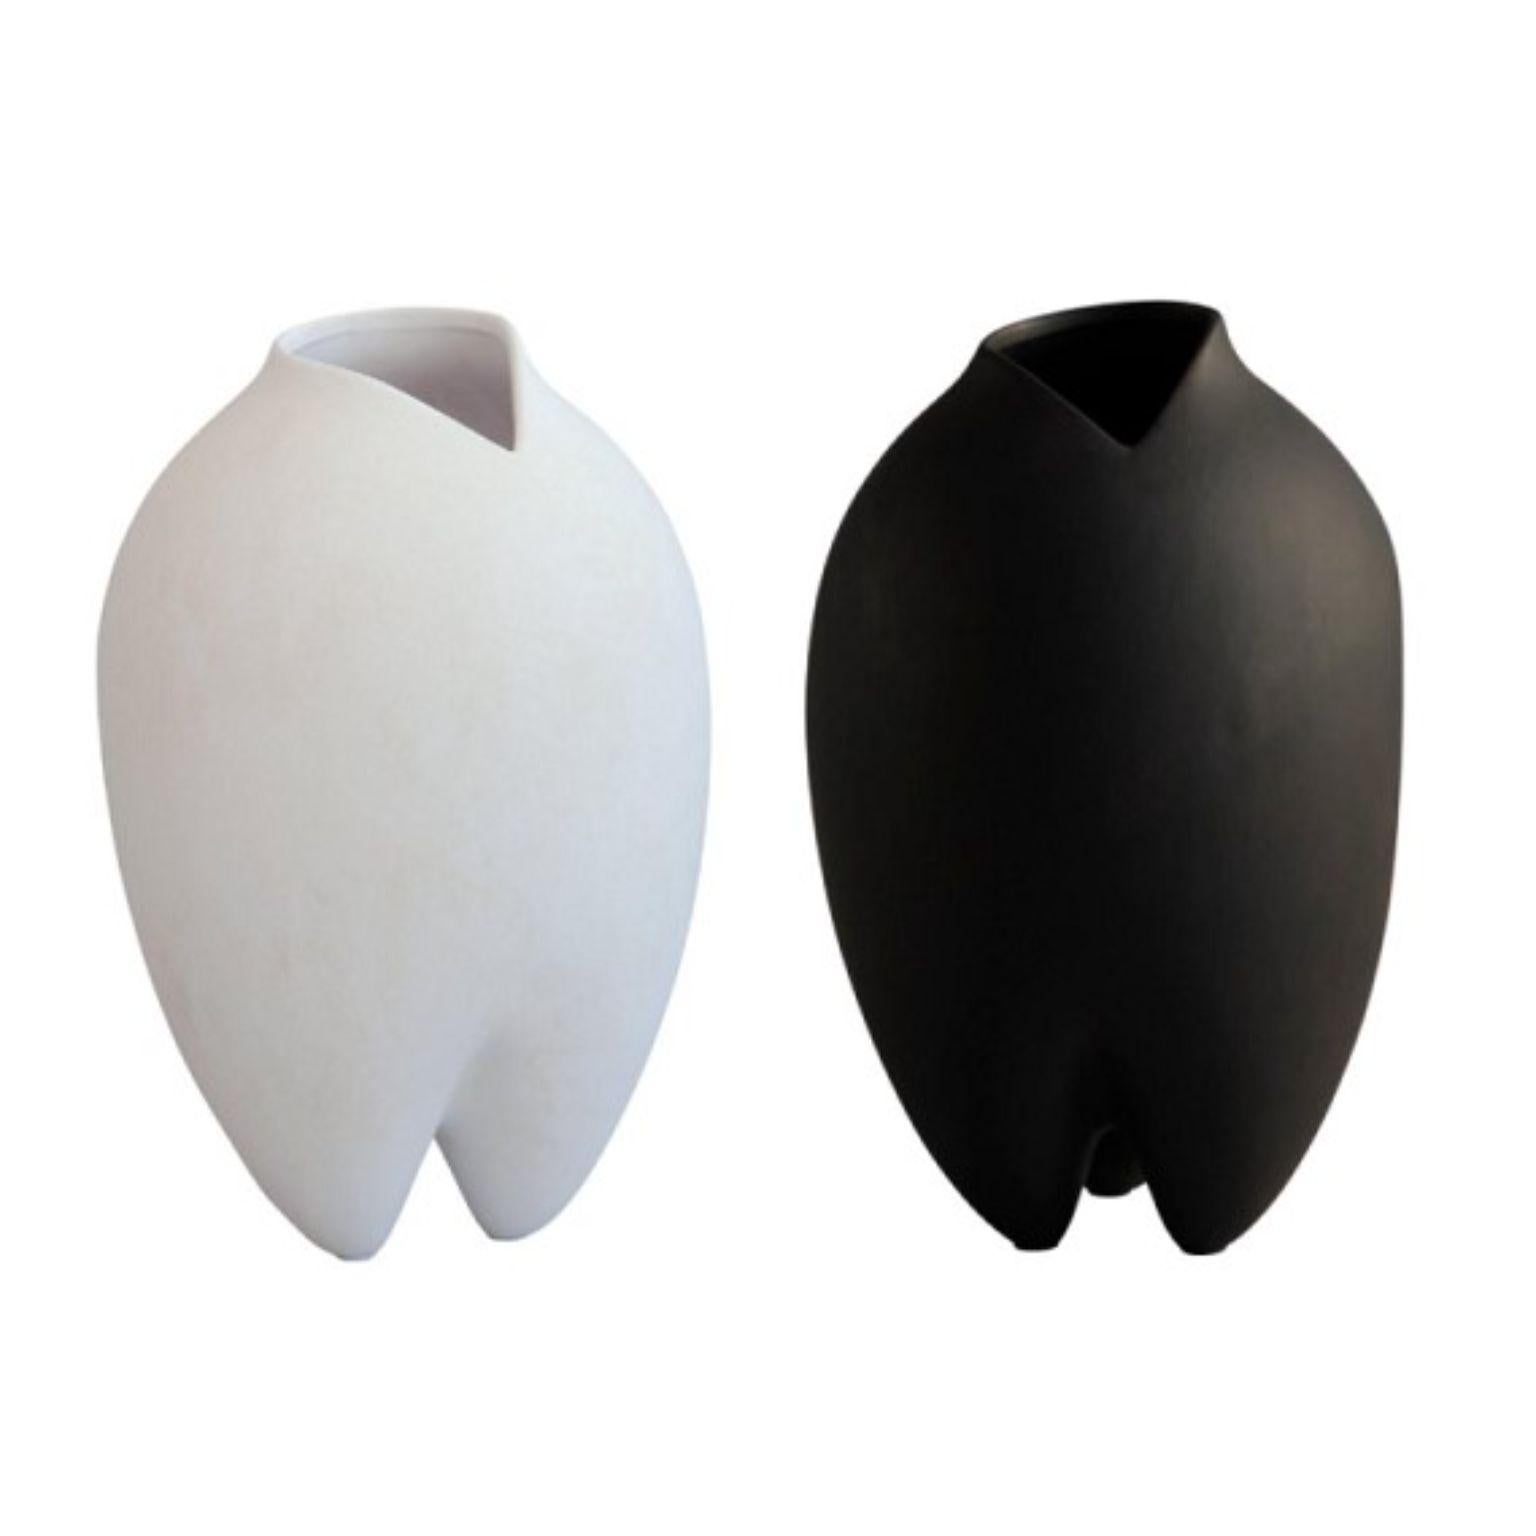 Set of 2 coffee Sumo vases slim by 101 Copenhagen
Designed by Kristian Sofus Hansen & Tommy Hyldahl
Dimensions: L 24 / W 24 / H 38 cm.
Materials: ceramic

Sumo celebrates the human body. As a reference to the Japanese sport Sumo, all vases are